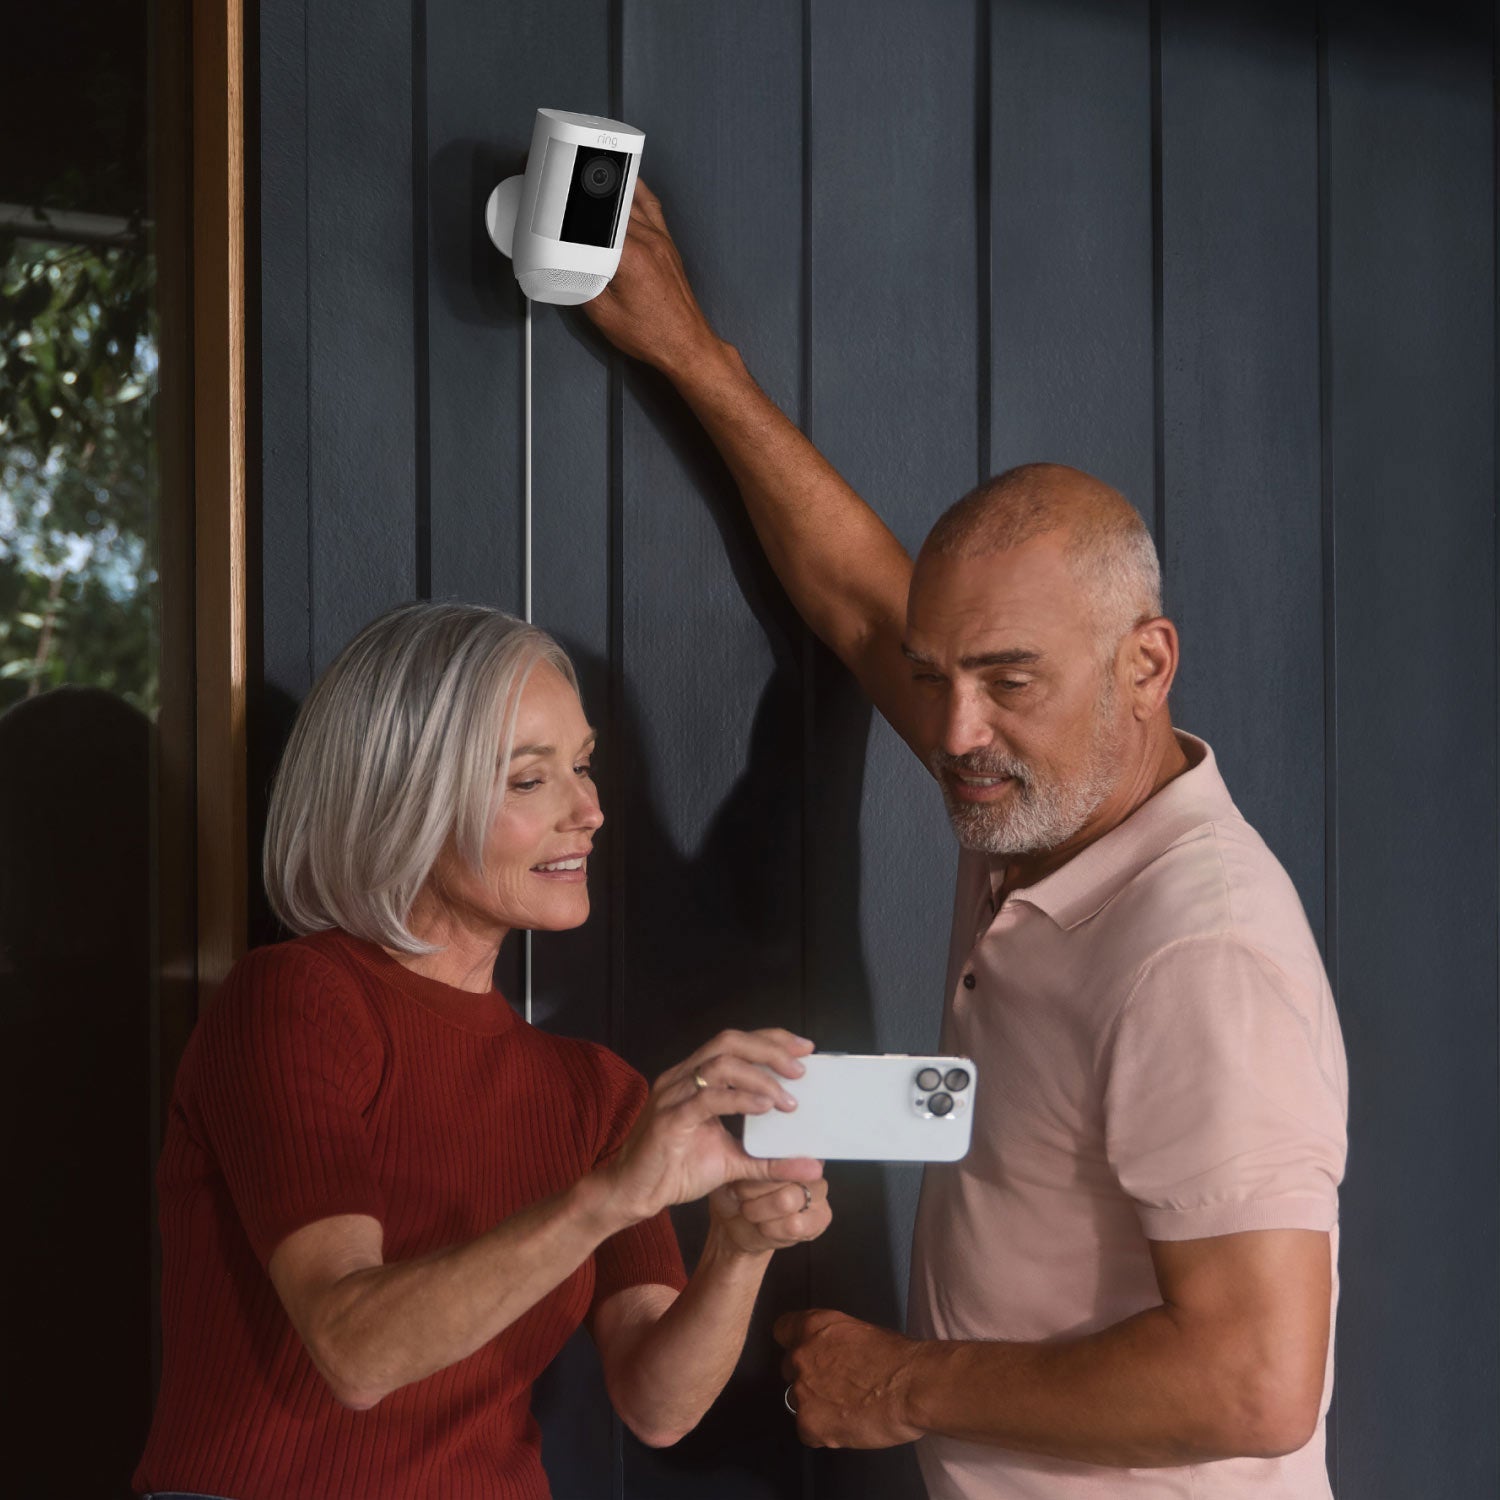 Spotlight Cam Pro (Plug-In) - Woman and man looking at smartphone while installing Spotlight Cam Pro Plug-In model on exterior wall of home.